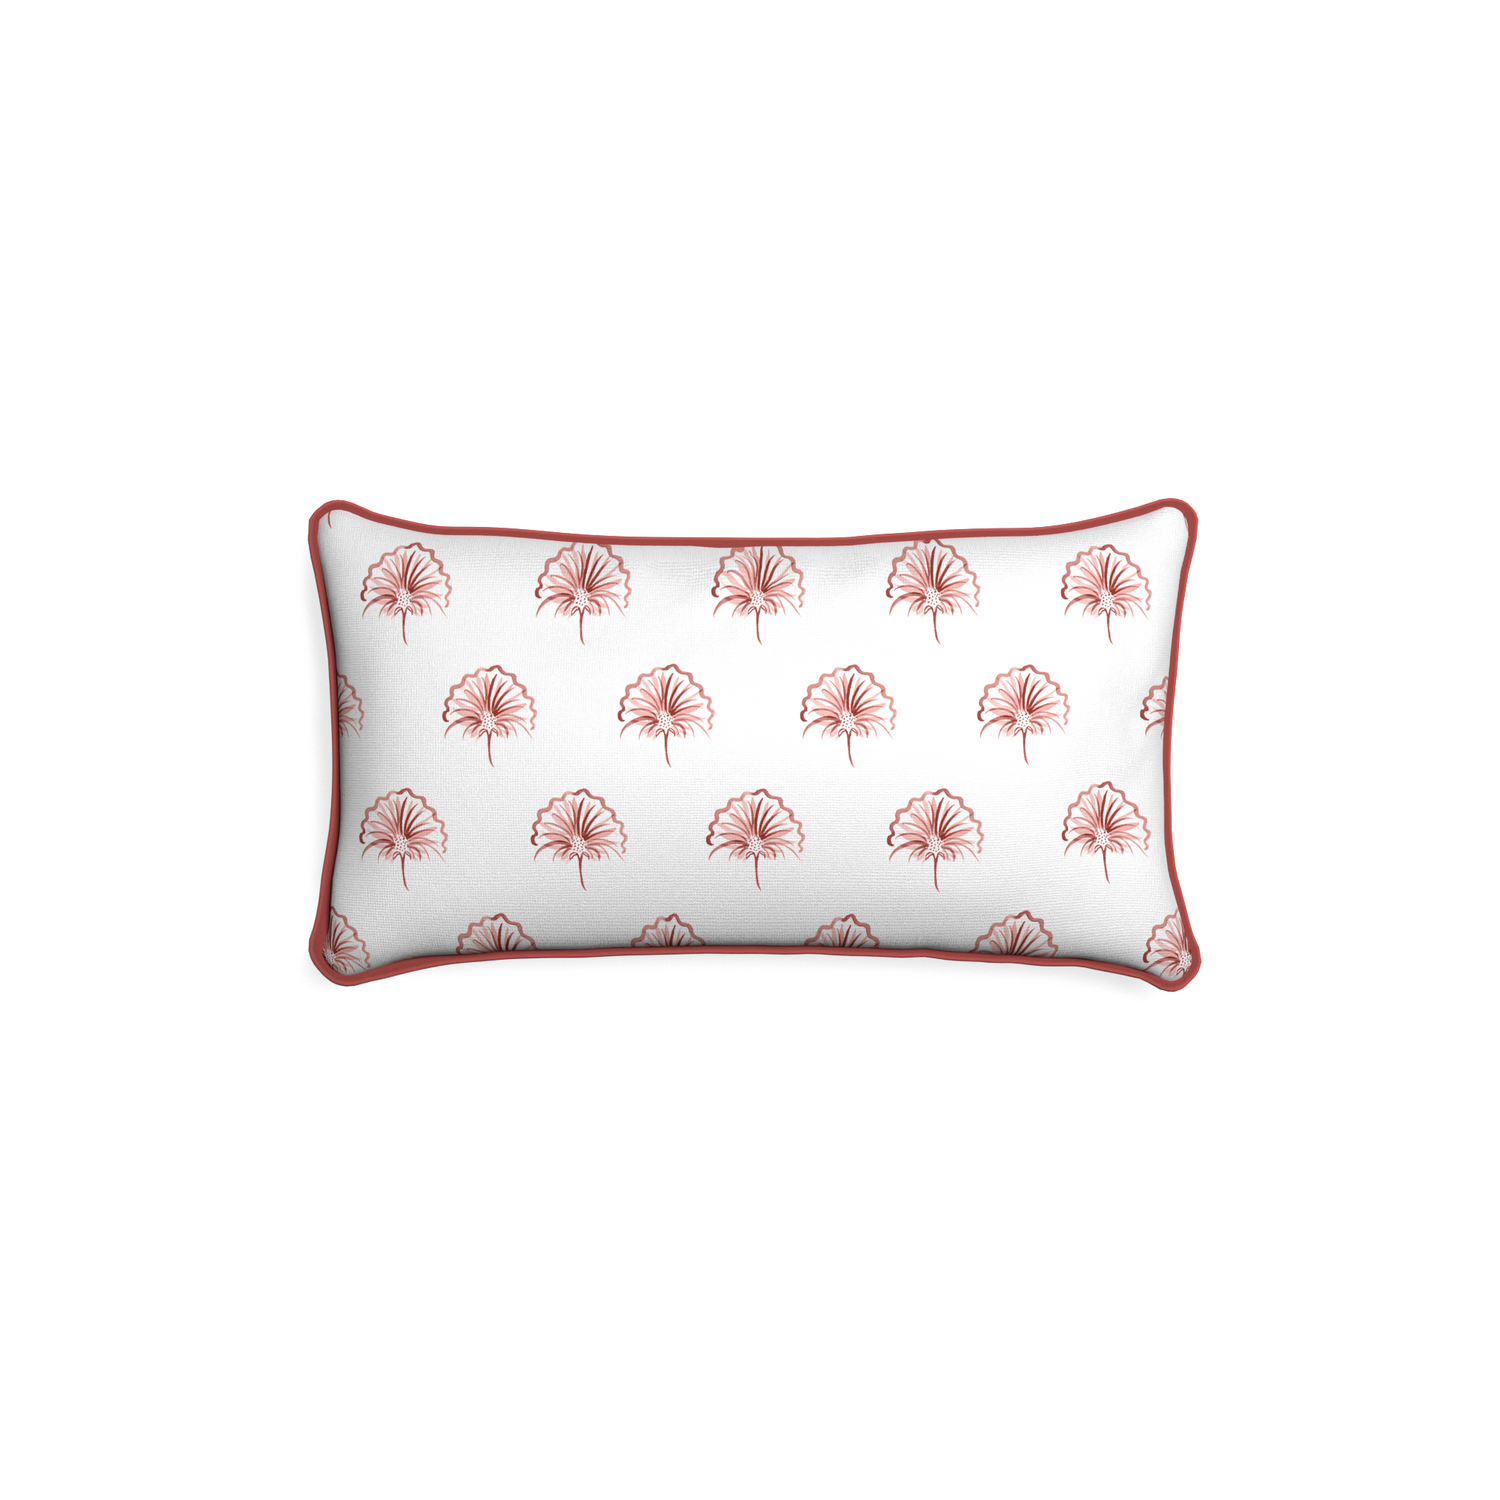 Petite-lumbar penelope rose custom floral pinkpillow with c piping on white background